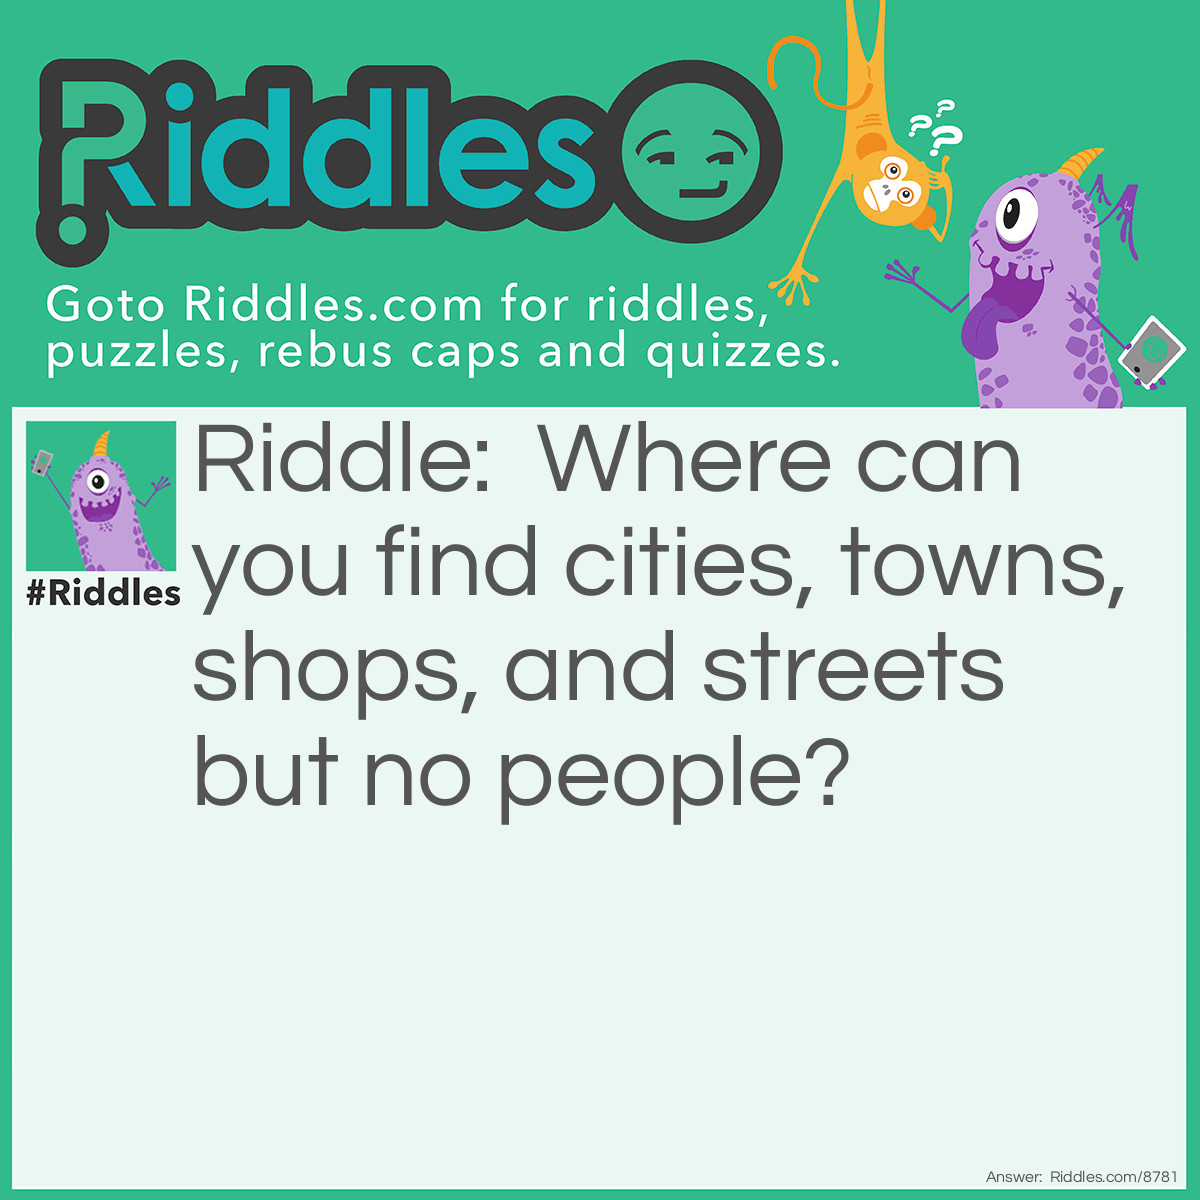 Riddle: Where can you find cities, towns, shops, and streets but no people? Answer: A map. Don't tell me you didn't get that right